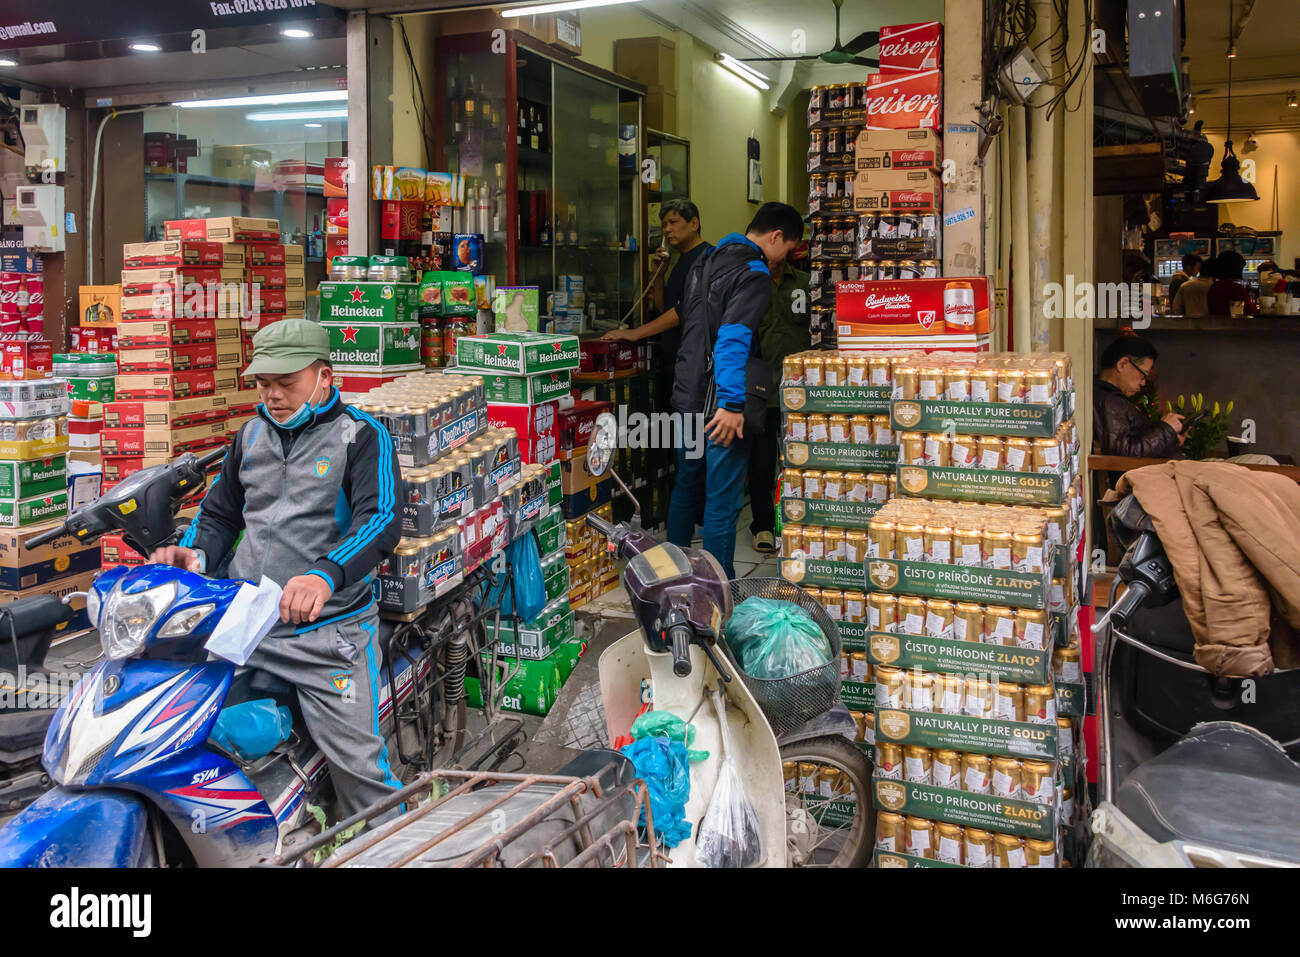 A man leaves a shop selling beer with six cases of beer balanced on the back of his scooter in Hanoi, Vietnam Stock Photo